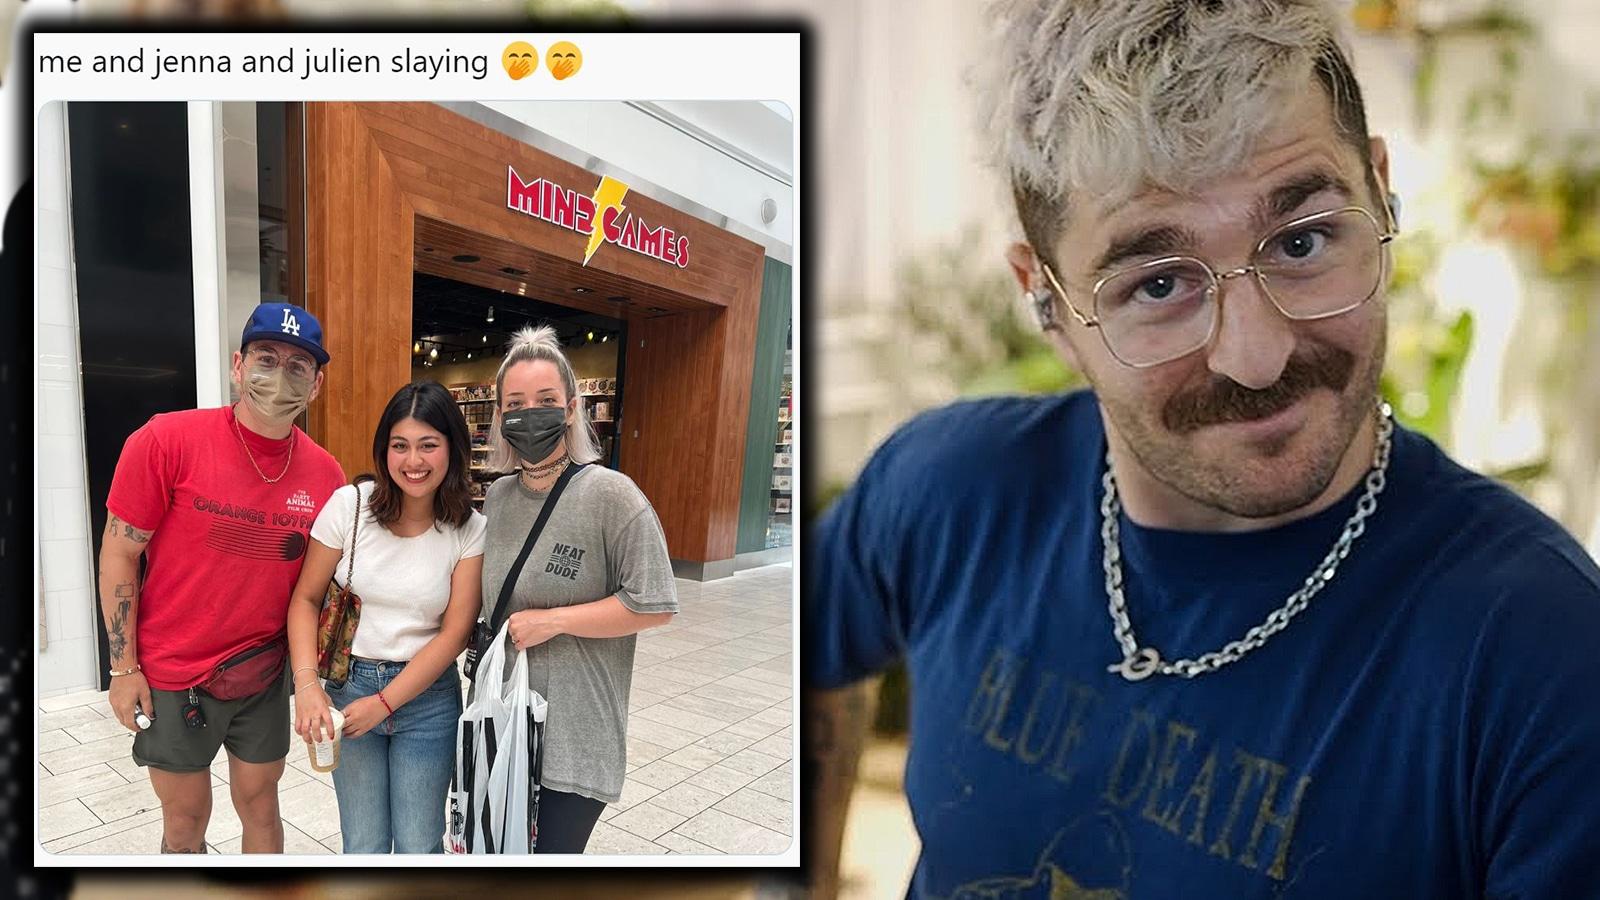 Julien Solomita clears up fan fears after viral jenna marbles photo